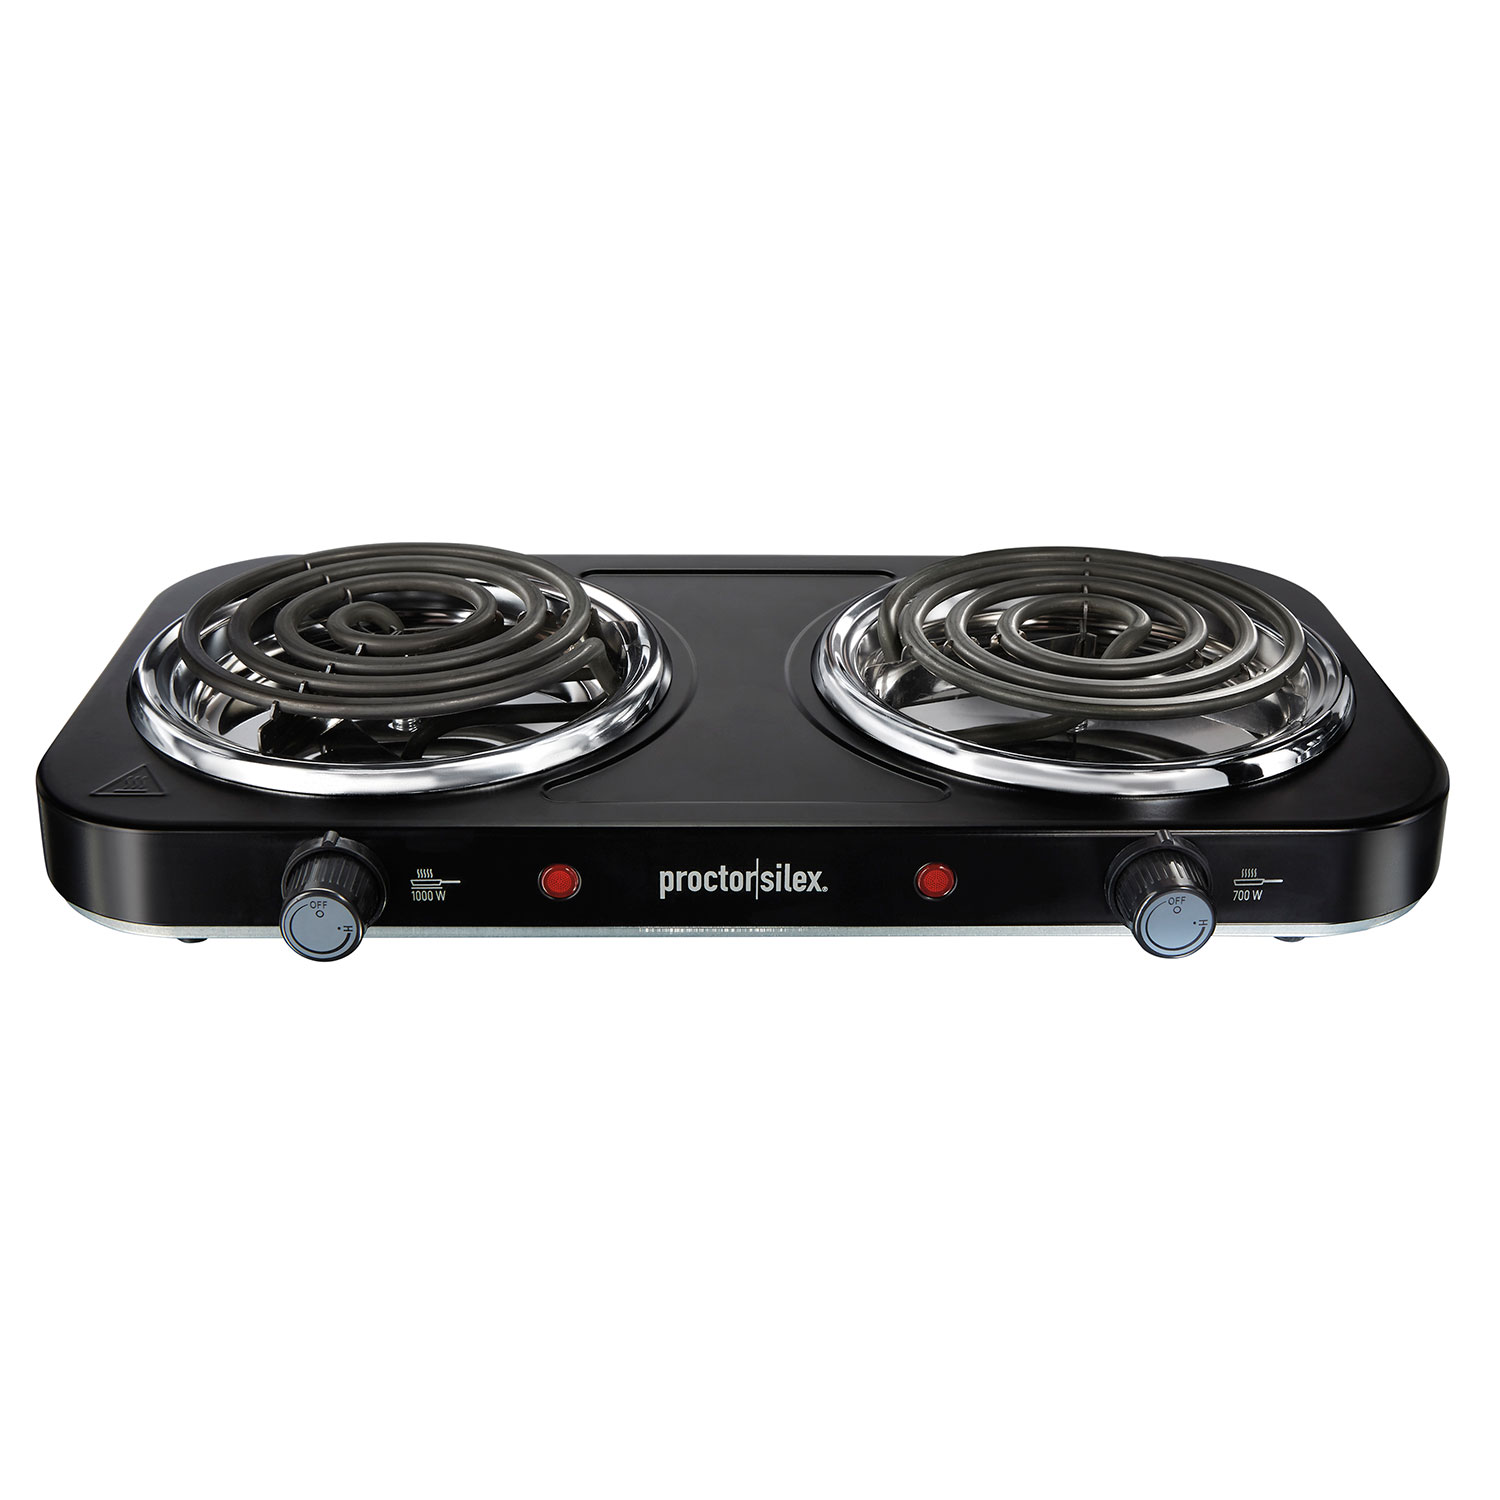 Portable Electric Stove Single/Dual Burner Travel Compact Small Hot Plate  Dorm